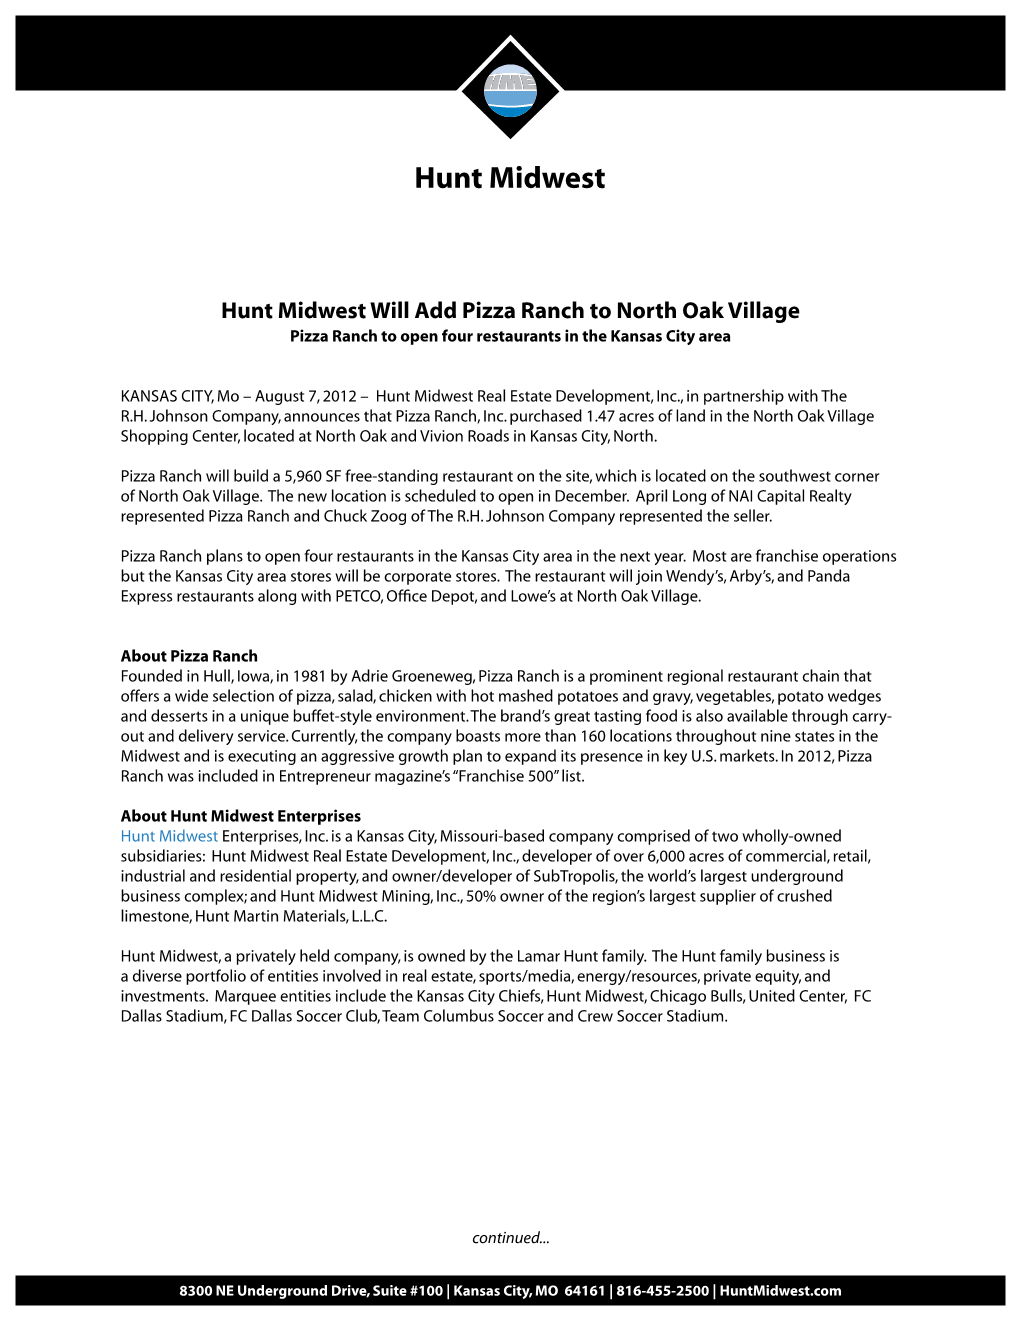 Hunt Midwest Will Add Pizza Ranch to North Oak Village Pizza Ranch to Open Four Restaurants in the Kansas City Area